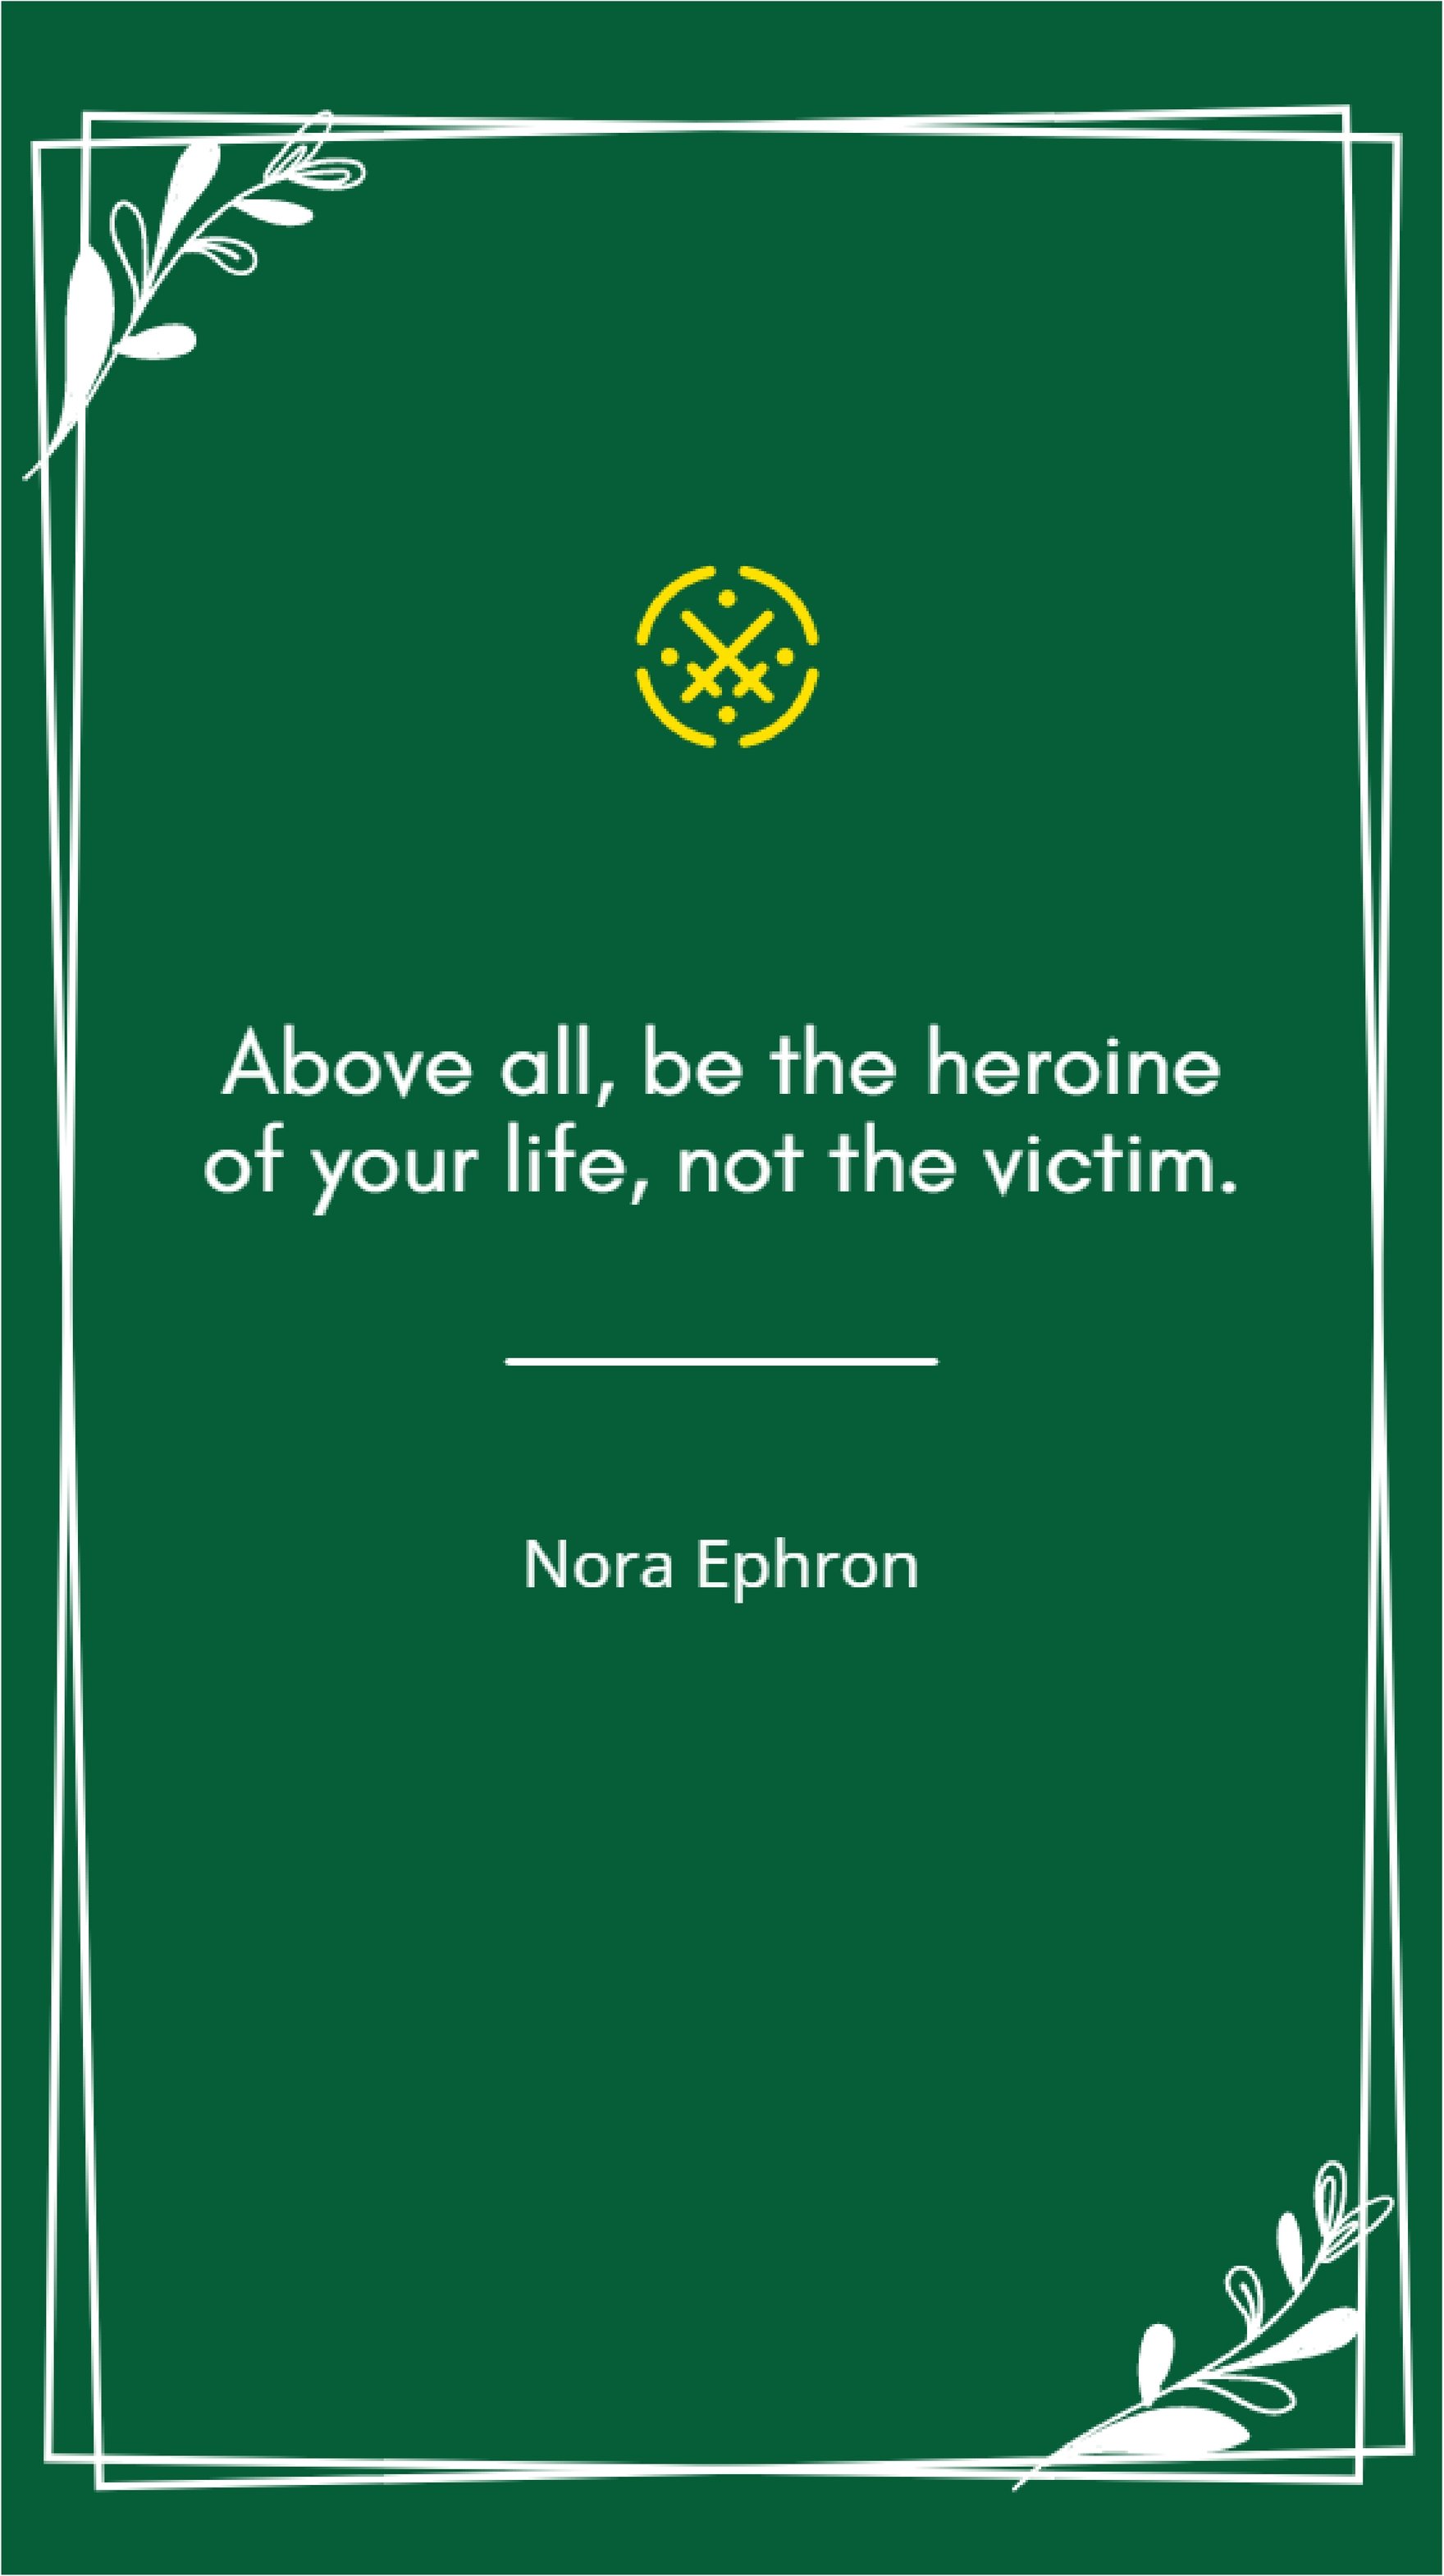 Nora Ephron - “Above all, be the heroine of your life, not the victim.”